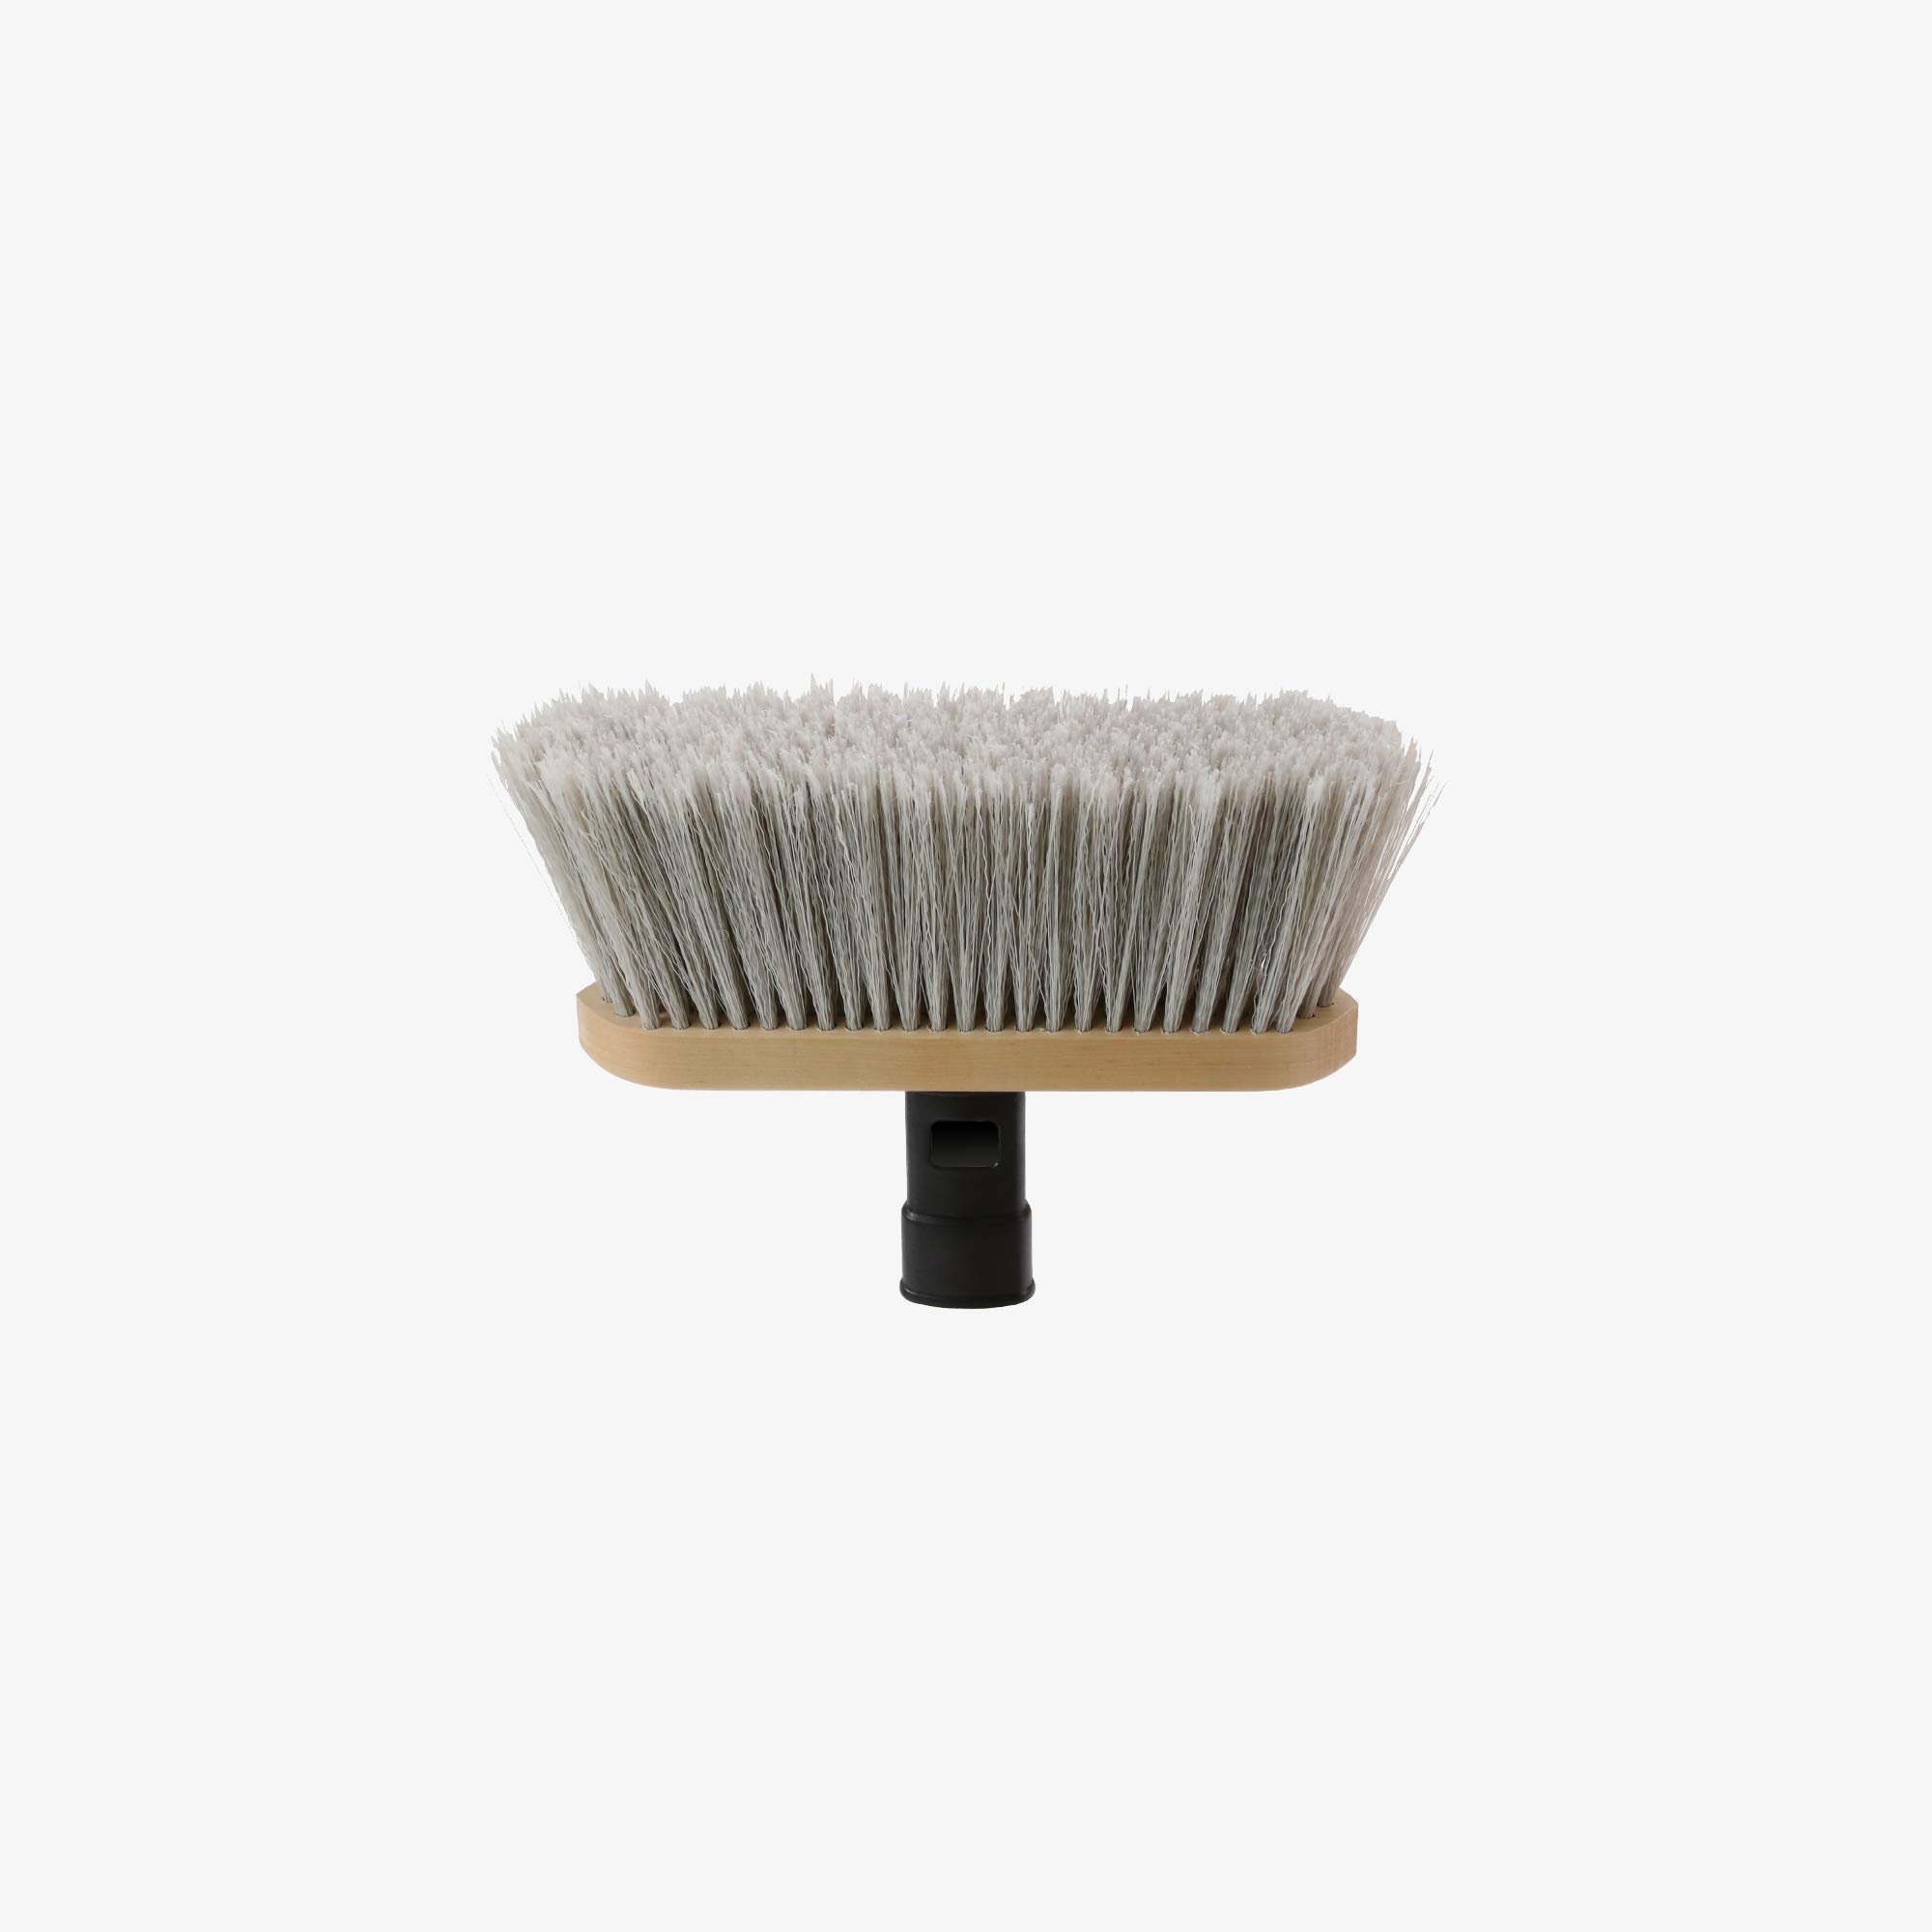 SWOPT Premium Smooth Surface Straight Broom Head — Cleaning Head Interchangeable with All SWOPT Cleaning Products for More Efficient Cleaning and Storage — Picks Up Fine Particles and Pet Hair